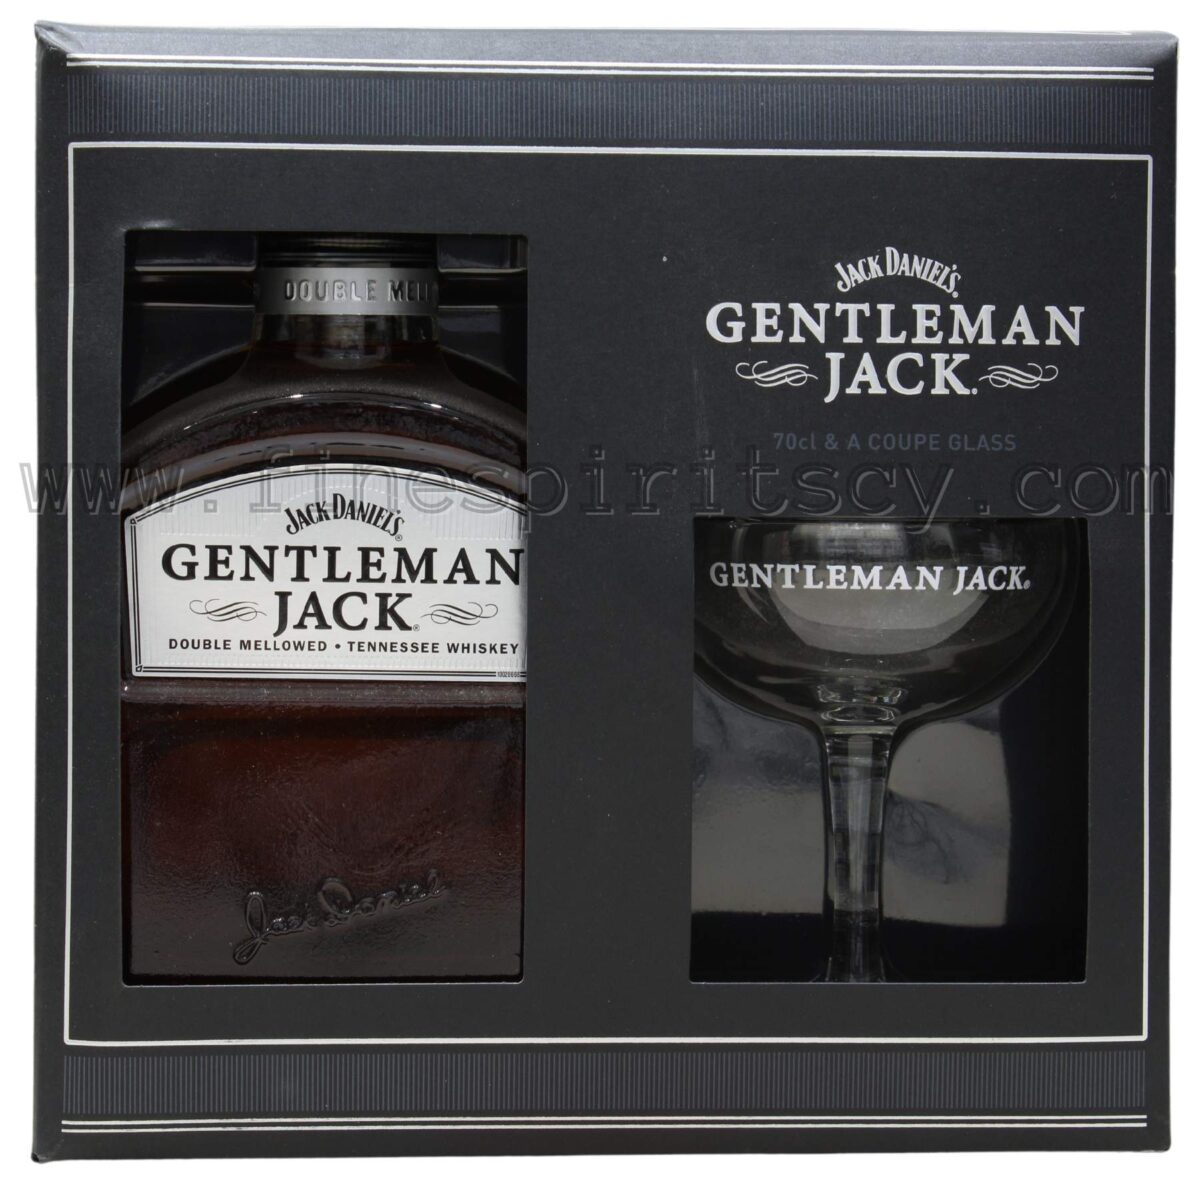 Gentleman Jack Gift Box Idea With Coupe Glass Price Cyprus Order Online